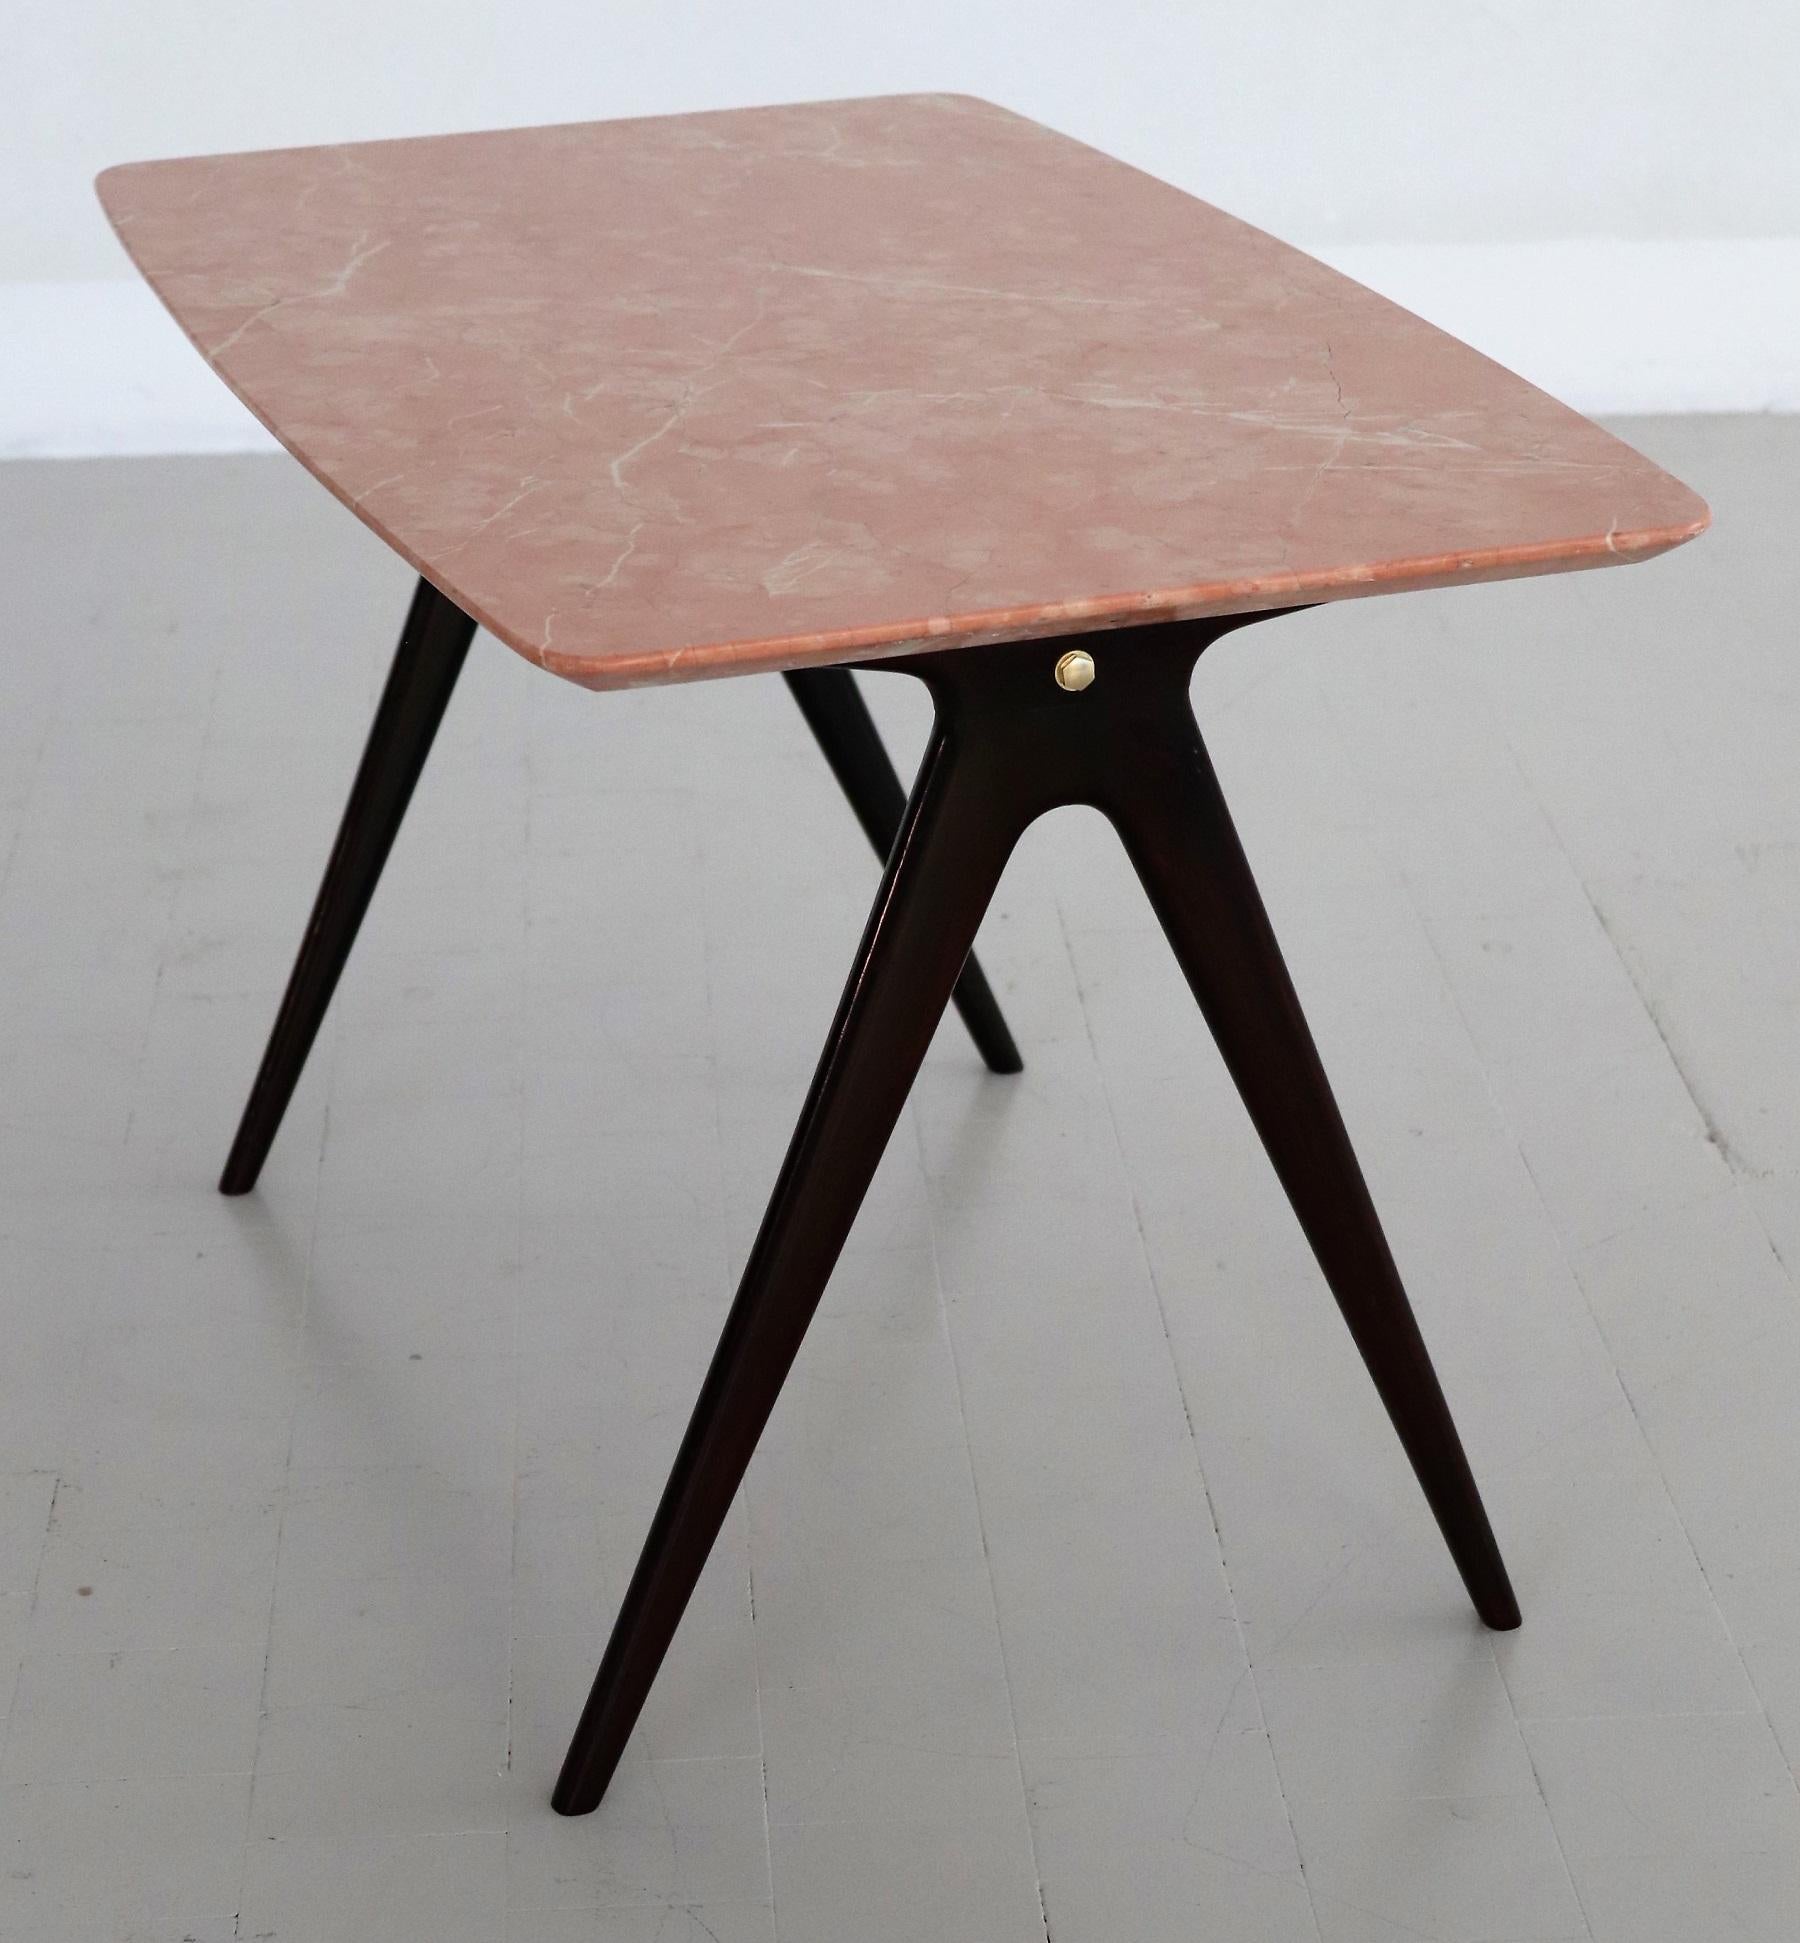 Italian Midcentury Coffee Table with Pink Marble Top and Wooden Legs, 1950s 6